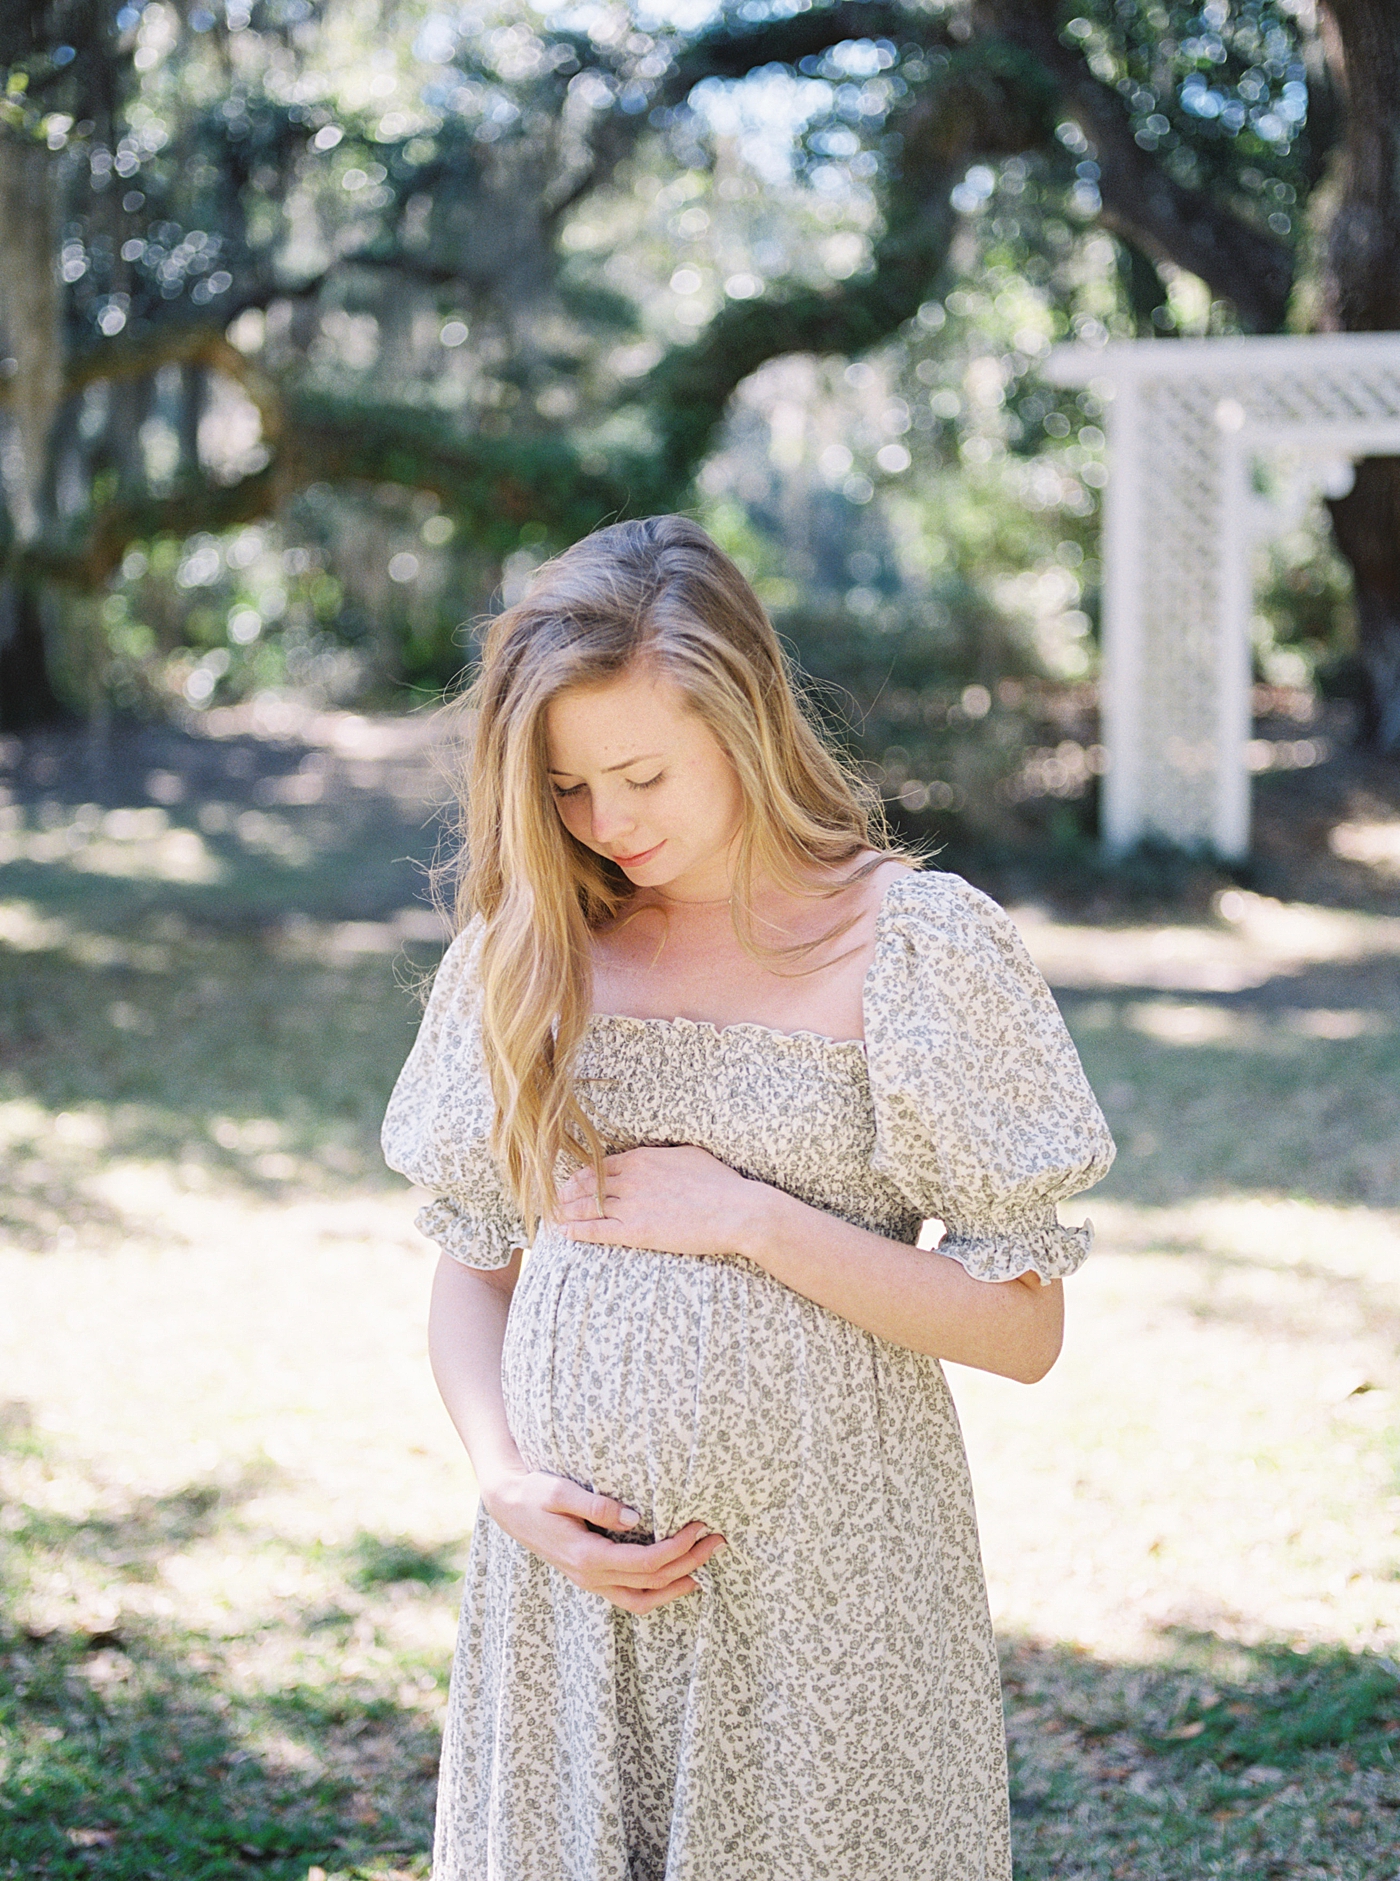 during their Maternity Session at Charlestowne Landing| Image by Caitlyn Motycka Photography